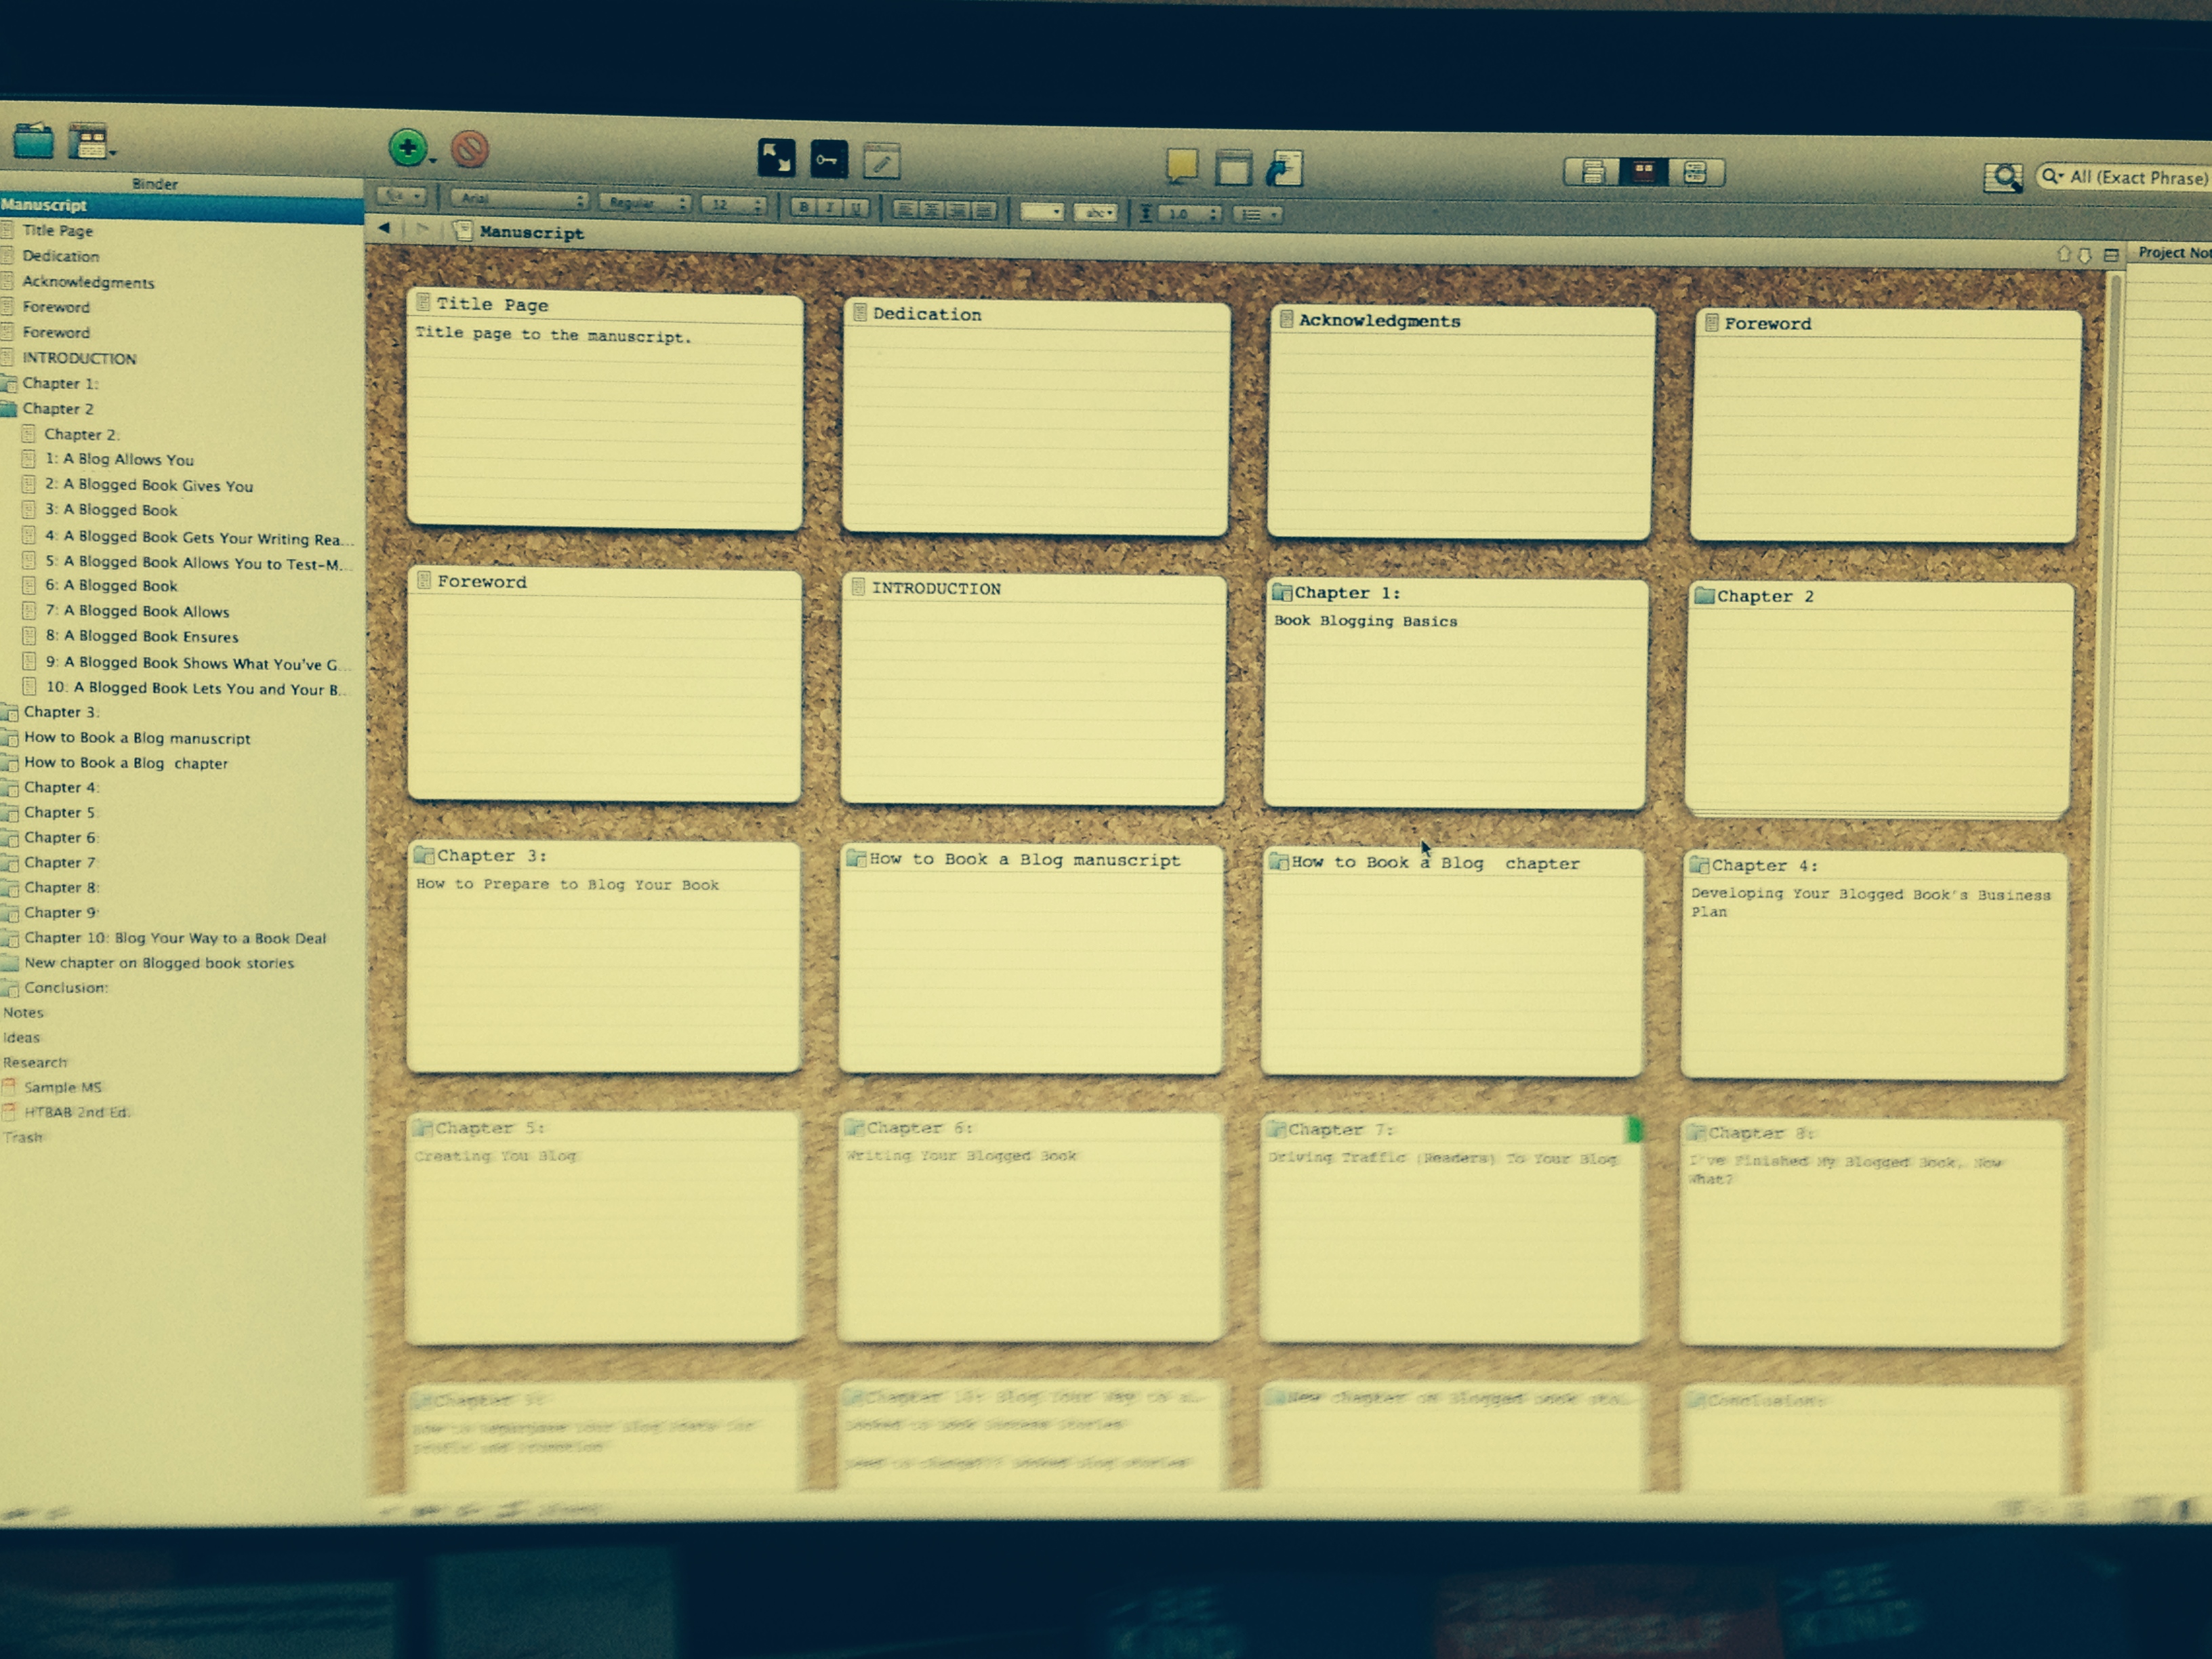 9 Reasons I’ve Decided to Use Scrivener to Write My Nonfiction Books